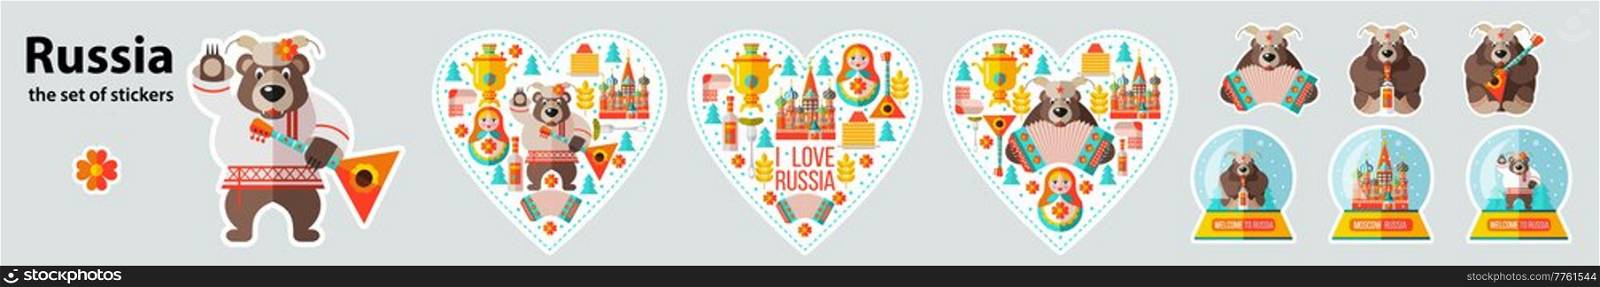 A set of vector stickers Russia. Collection of design elements. Russian souvenirs. Heart shaped stickers and snow balls.. A set of vector stickers Russia. Collection of design elements. Russian souvenirs.